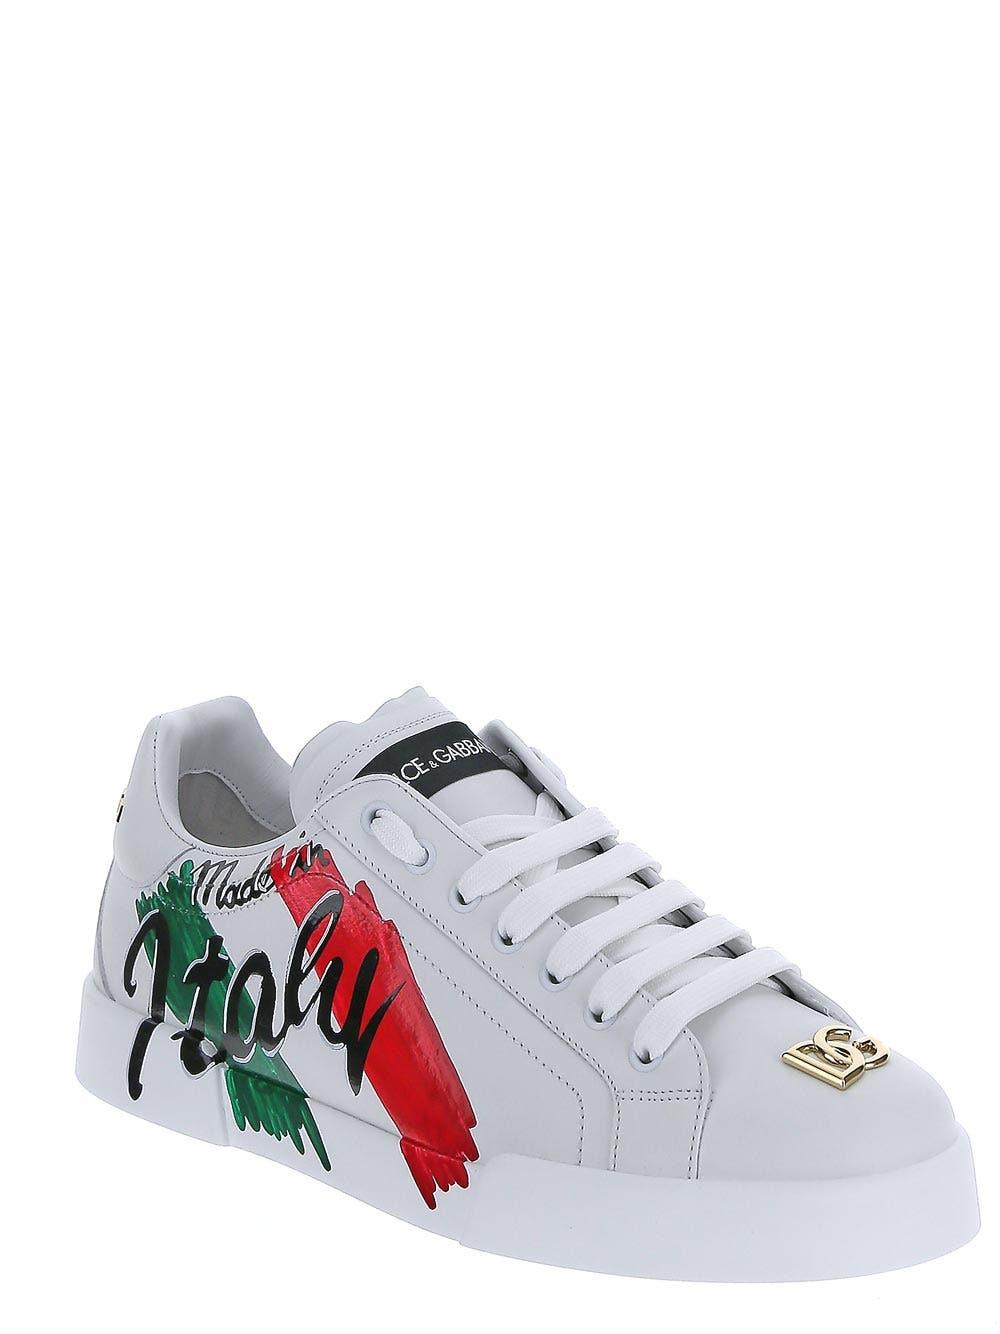 Dolce & Gabbana Italy Sneakers in White for Men | Lyst